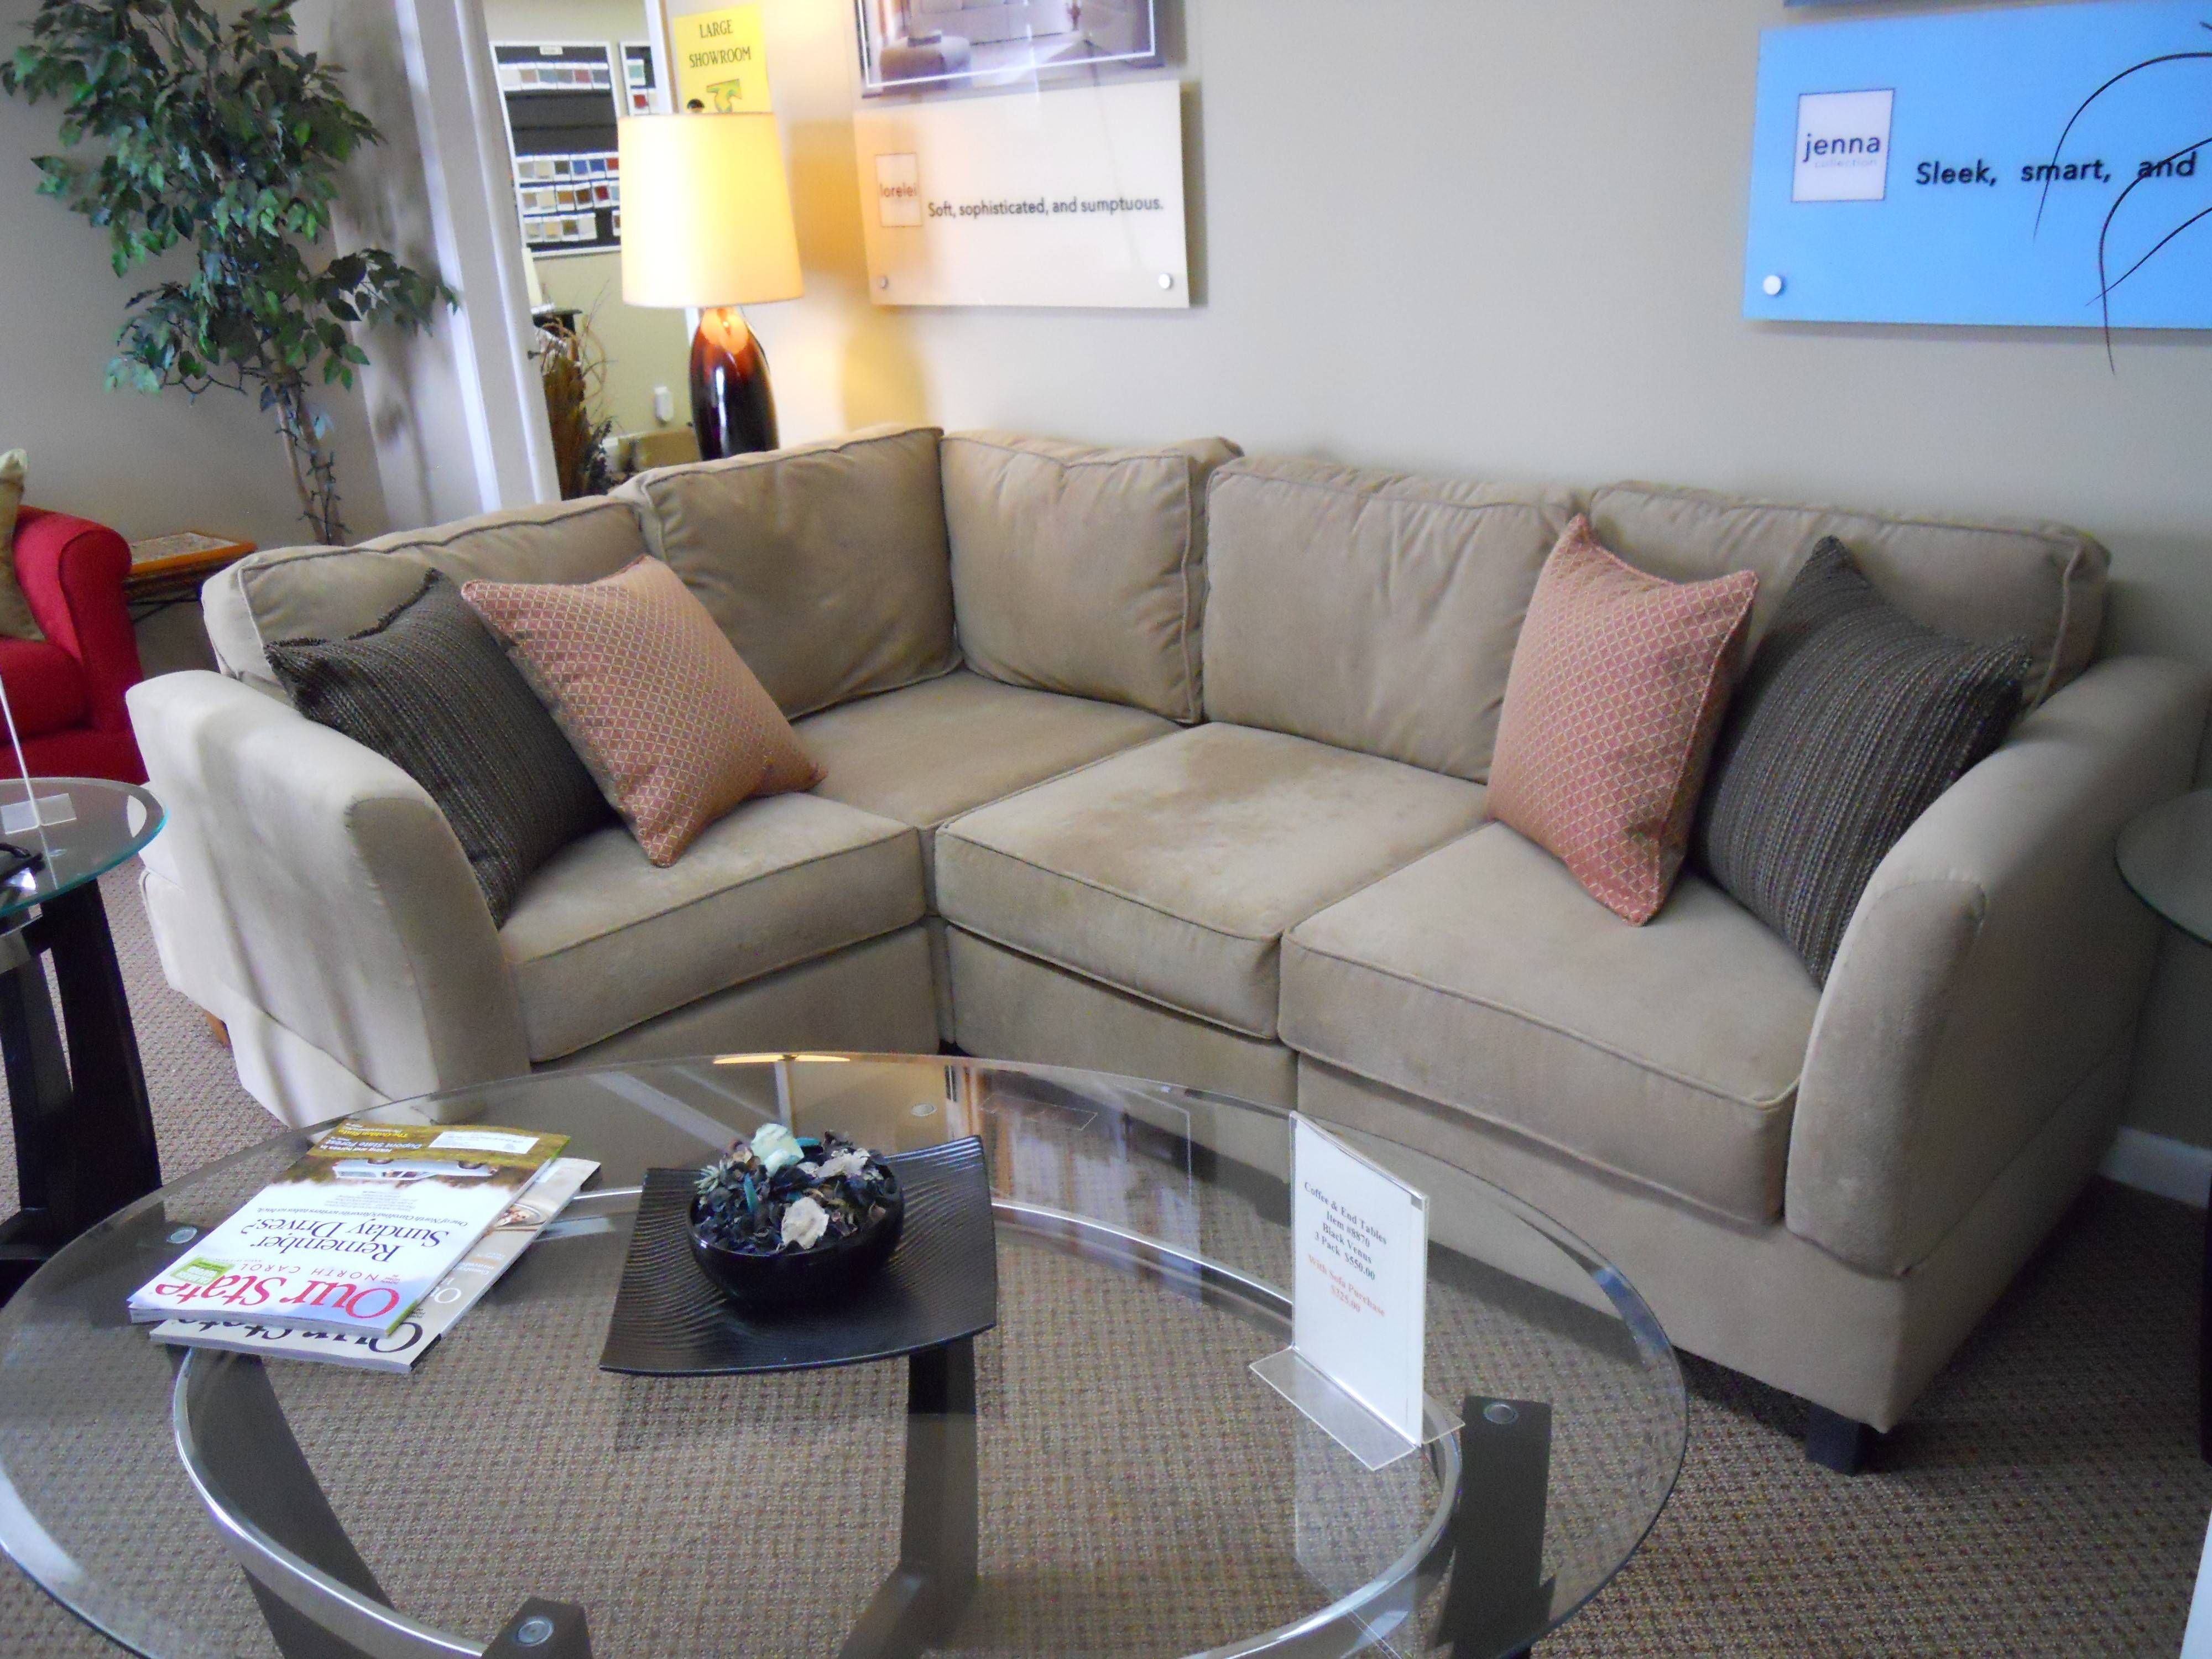 Furniture & Sofa: Best Sectional For Small Spaces | Small Space With Armchairs For Small Spaces (View 13 of 30)